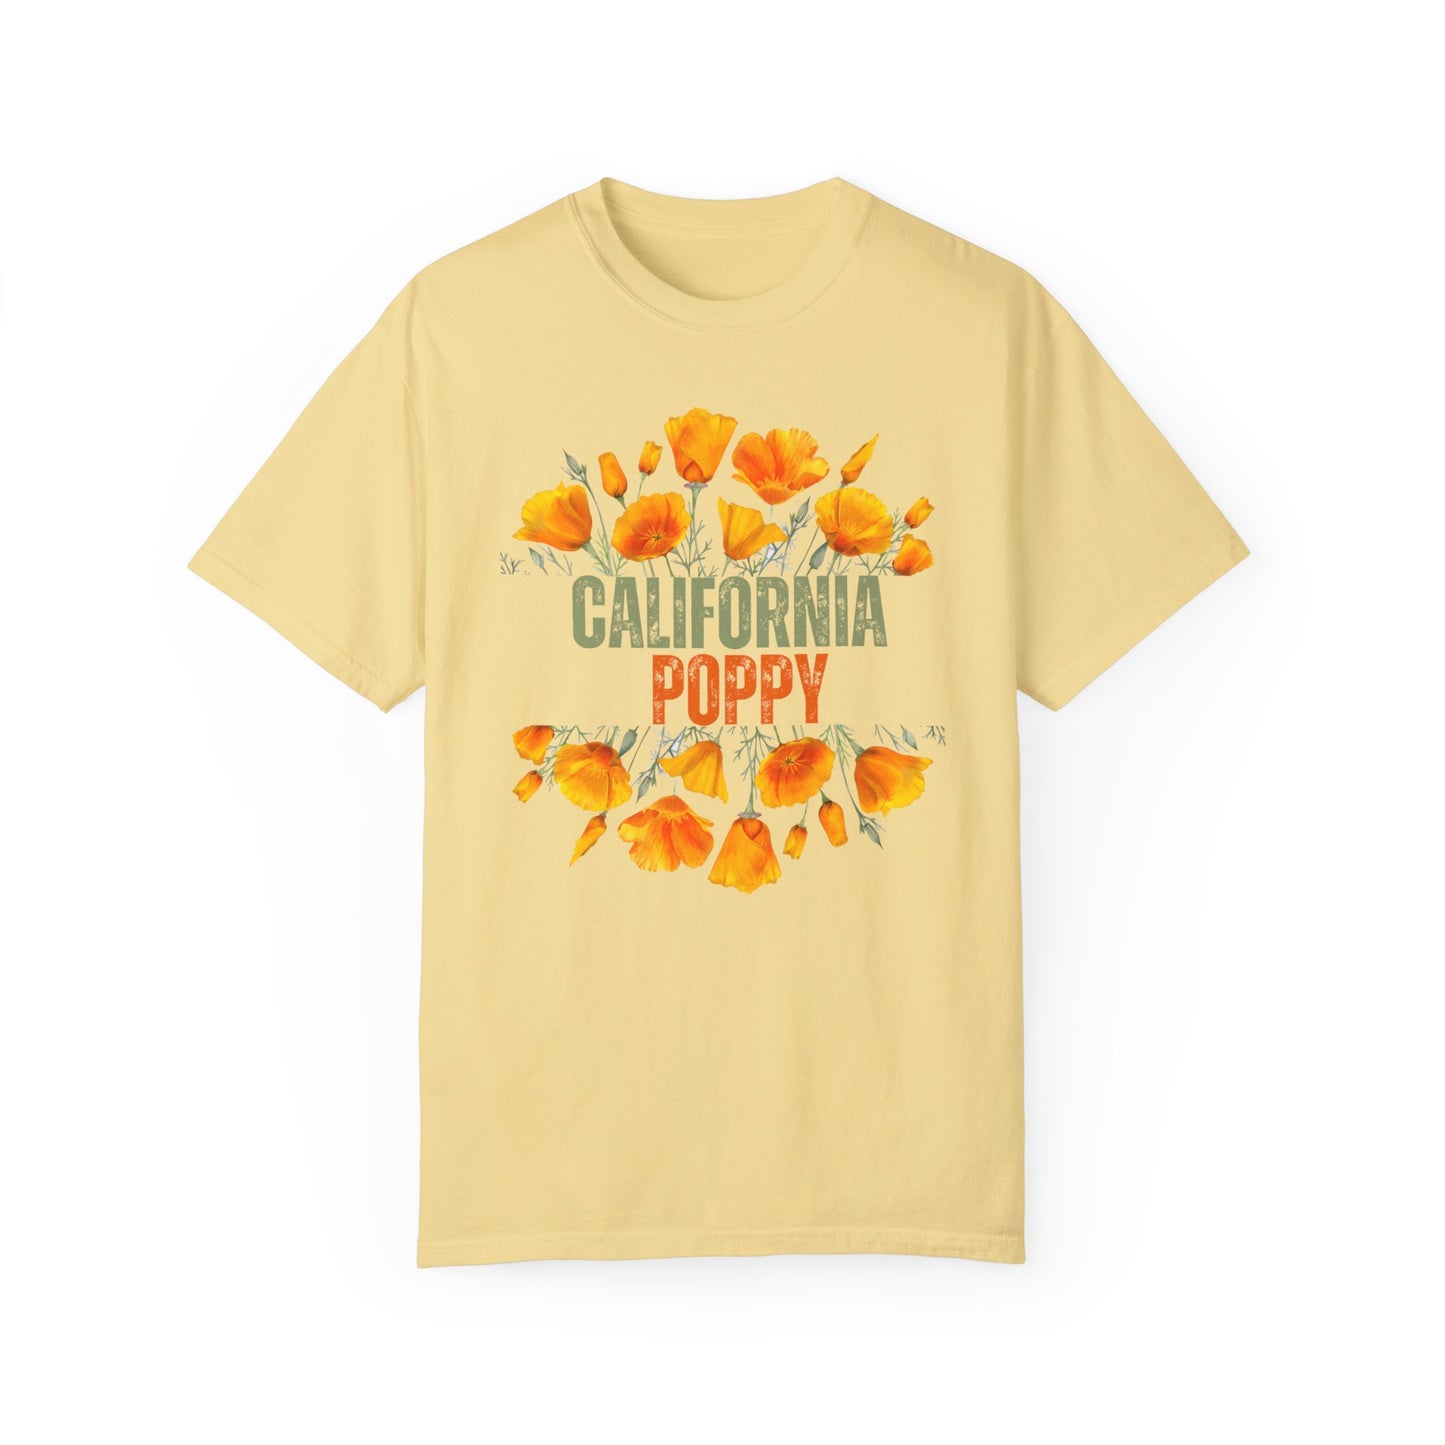 Beautiful California Poppy State Flower Garment-Dyed T-shirt, California Poppy Shirt, State Flower Tshirt, Gifts For Her, Gifts For Women